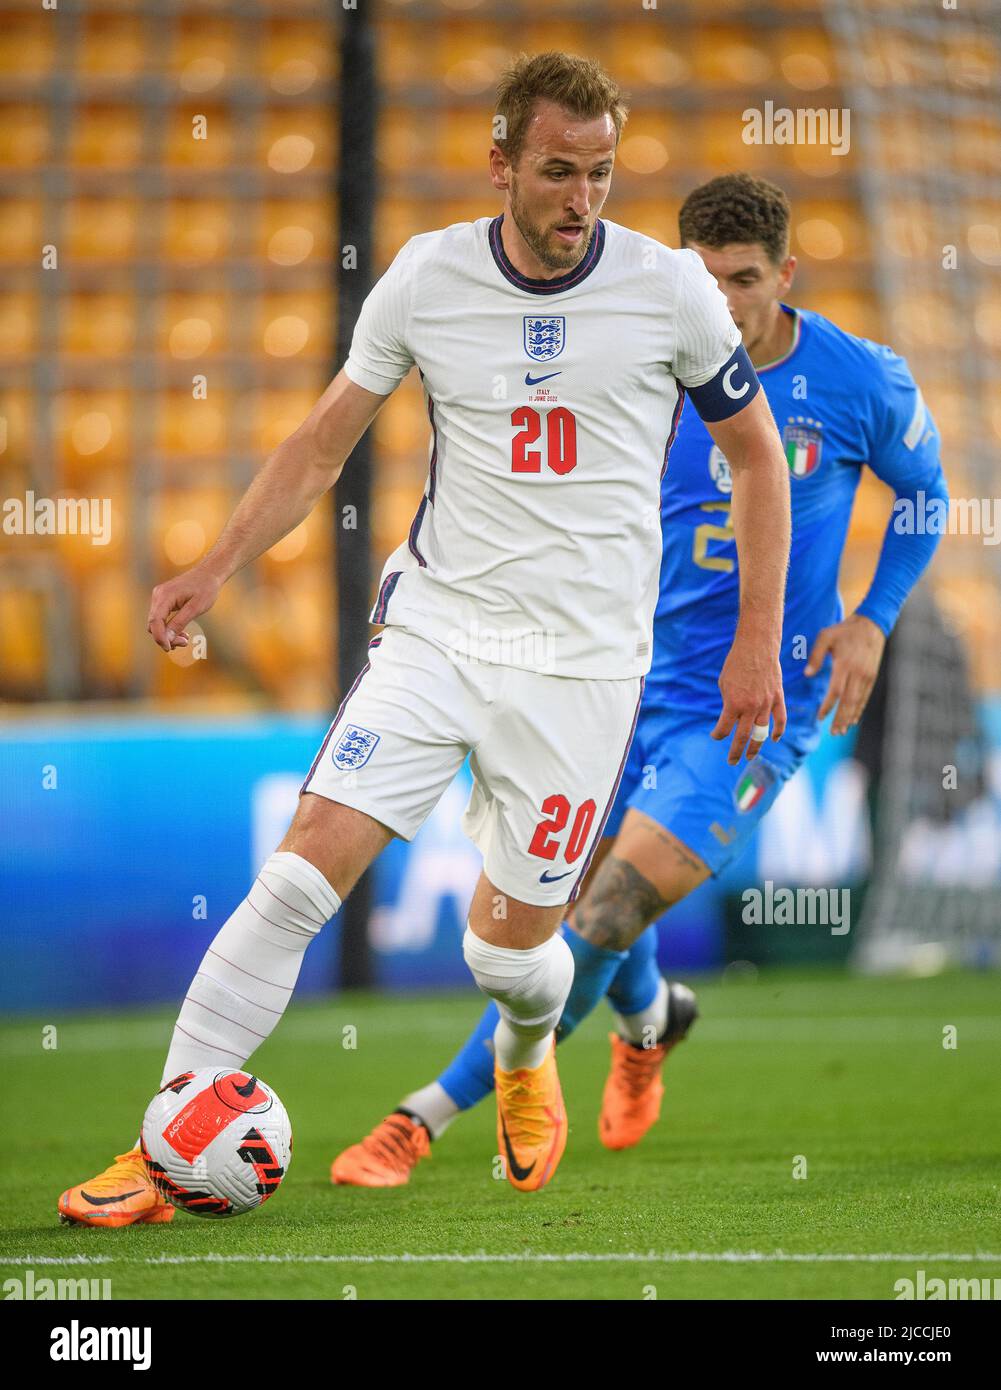 11 Jun 2022 - England v Italy - UEFA Nations League - Group 3 - Molineux Stadium  Harry Kane during the match against Italy. Picture Credit : © Mark Pain / Alamy Live News Stock Photo